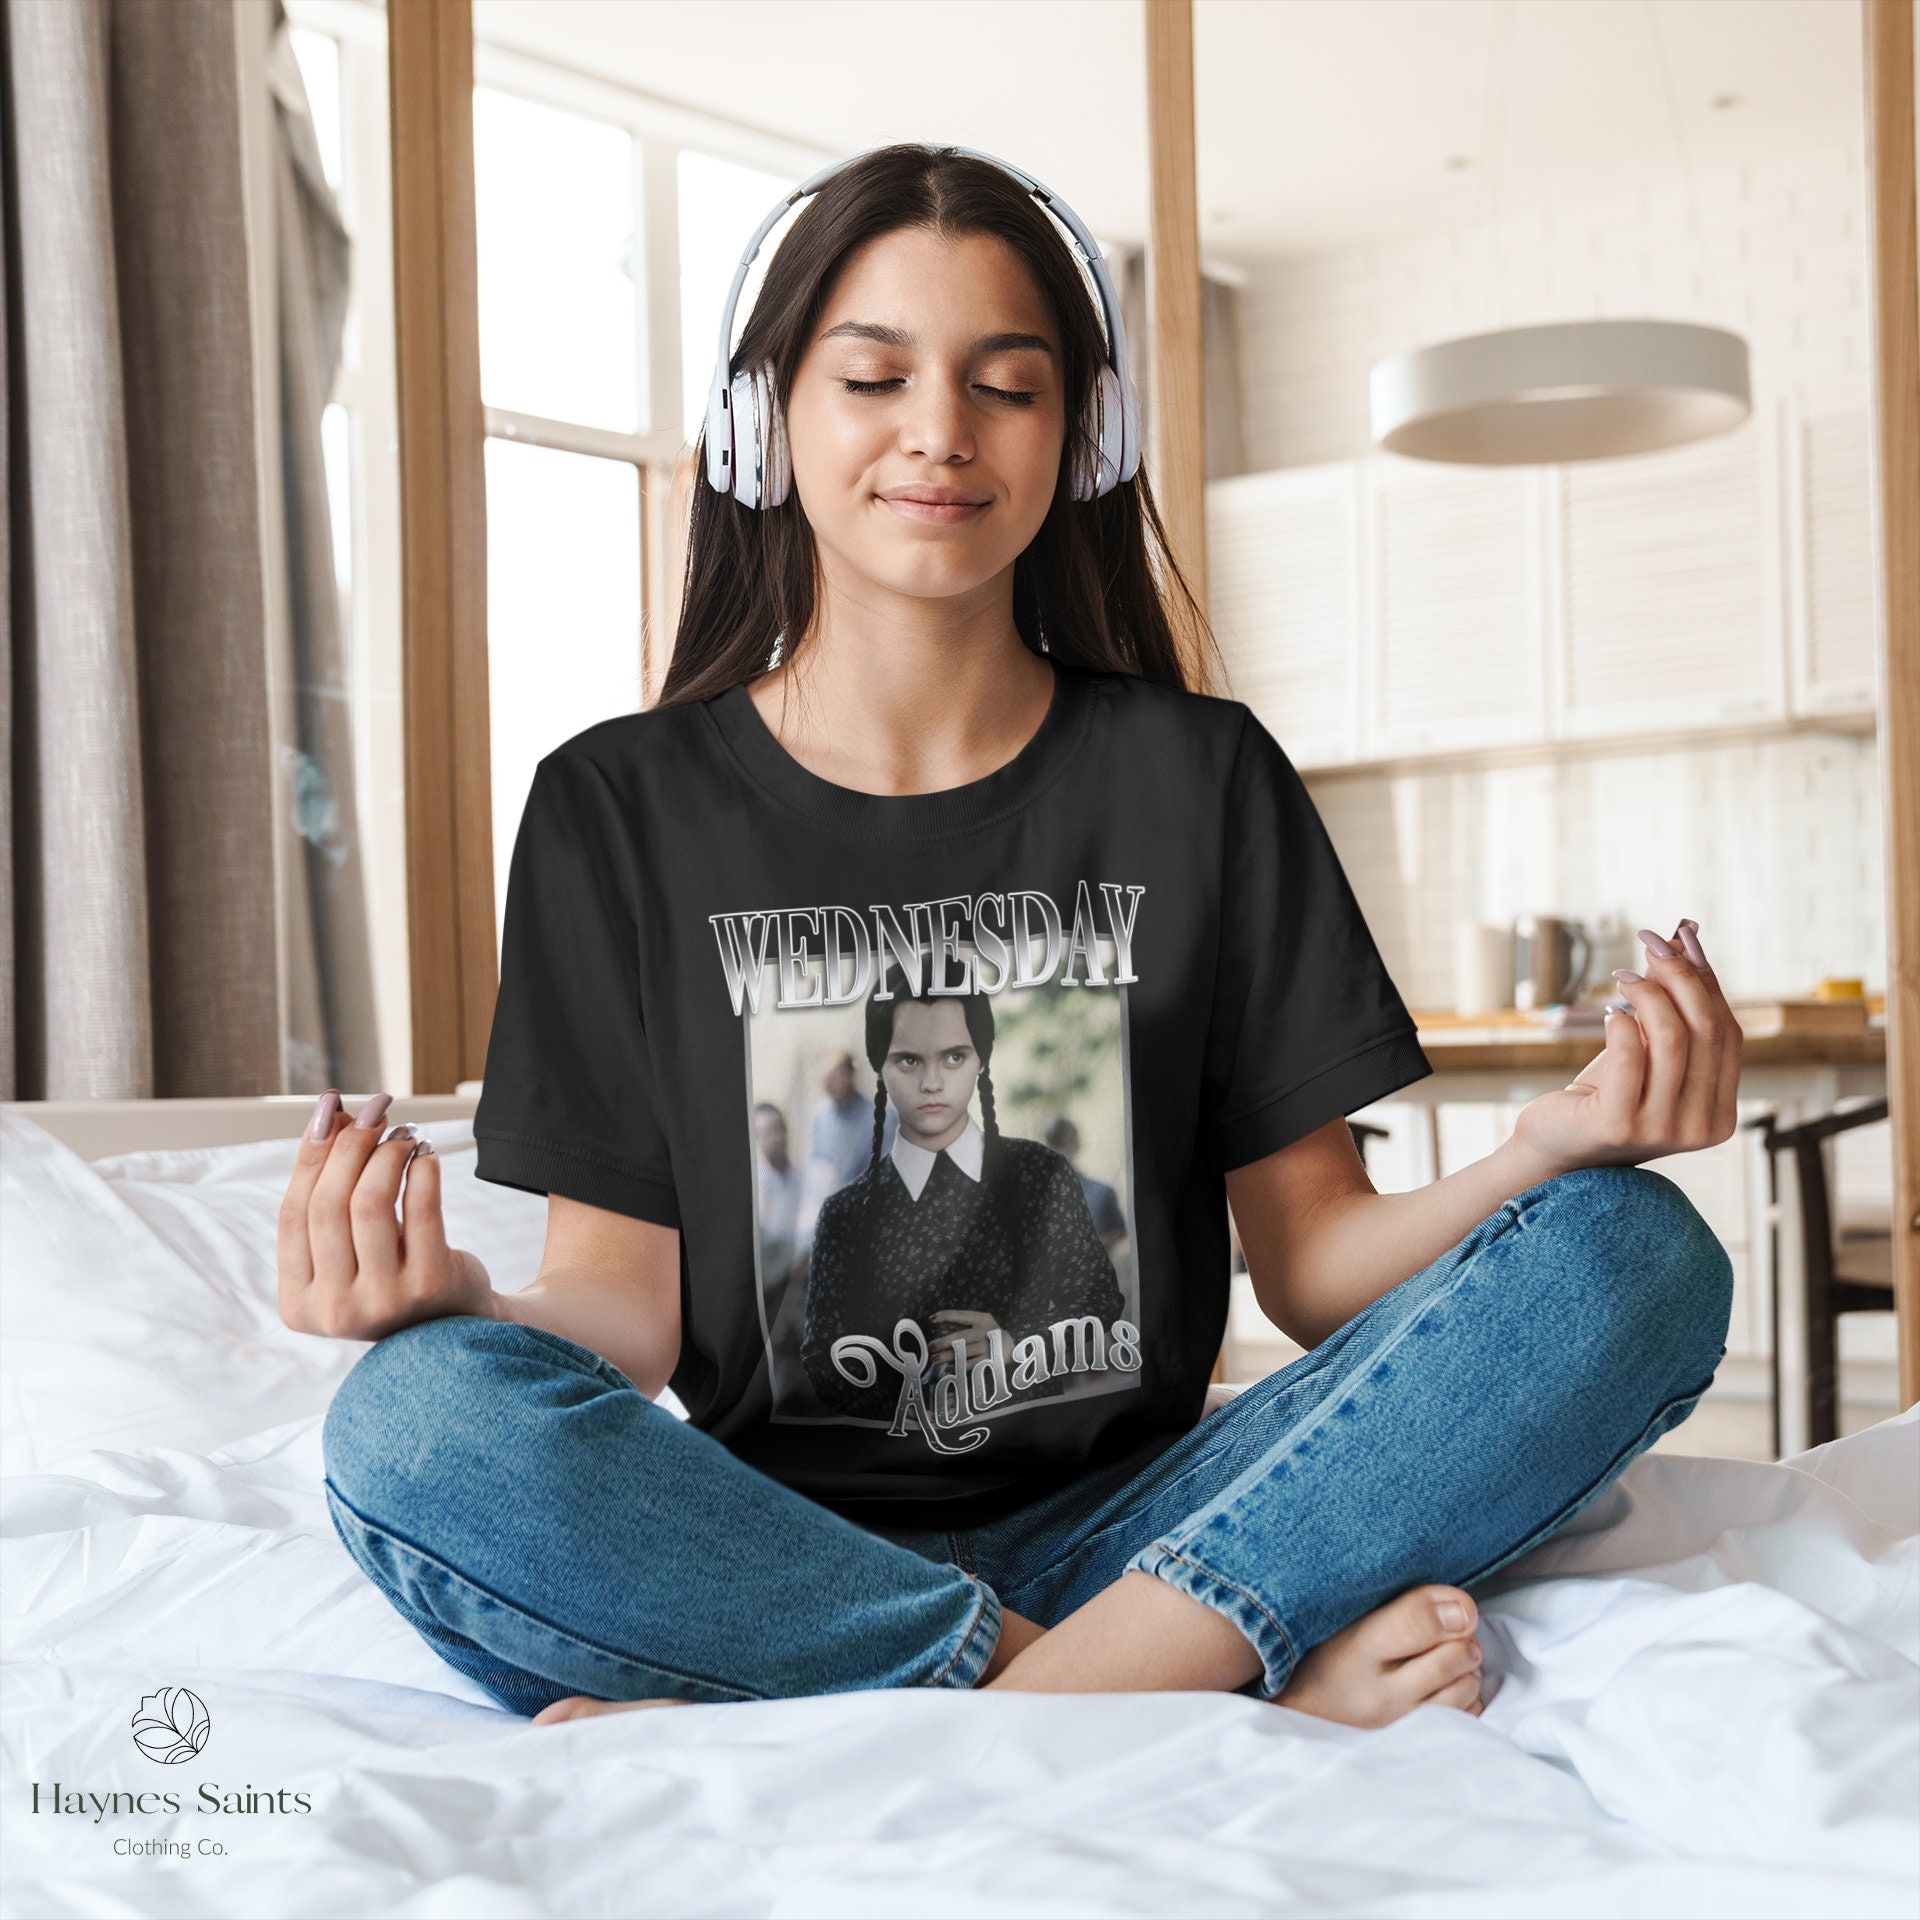 Discover Wednesday Addams Vintage T-Shirt, Addams Family Shirt, Morticia Poster Shirt, Morticia Addams Fictional Character, Wednesday Shirts